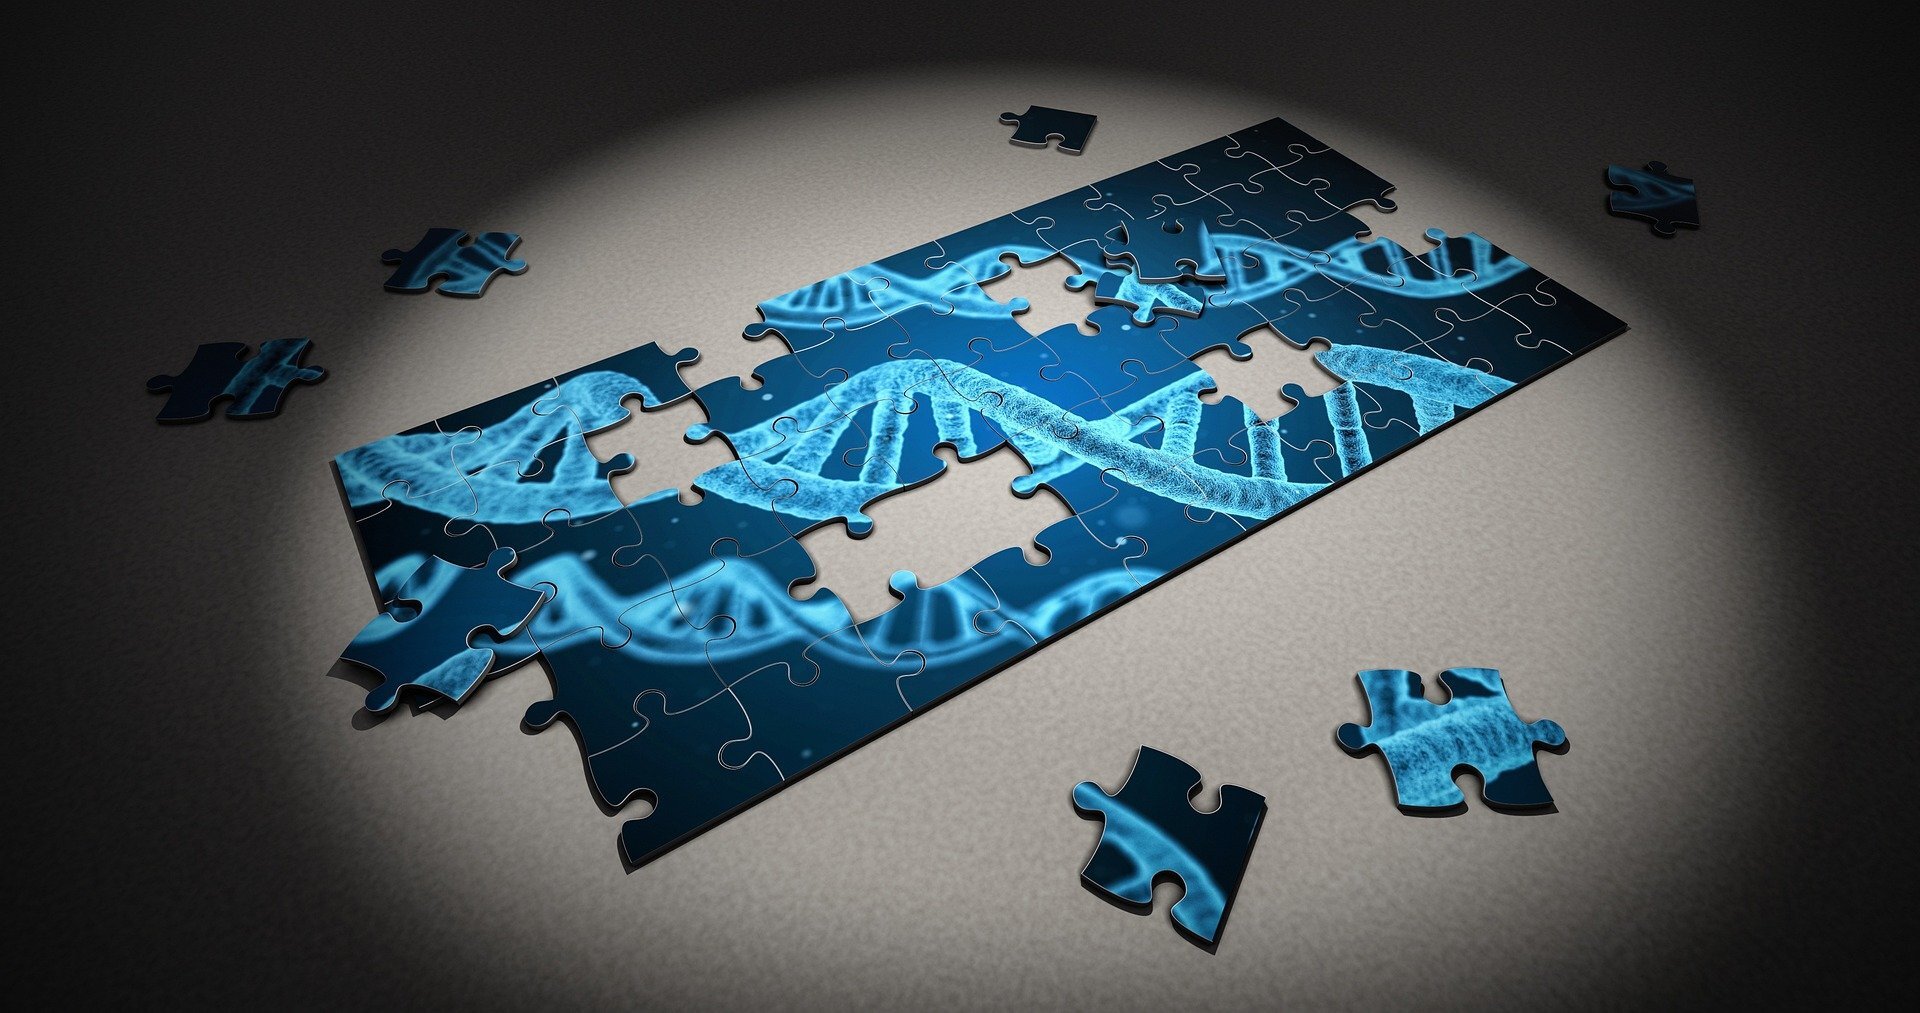 #Breaks in ‘junk’ DNA give scientists new insight into neurological disorders